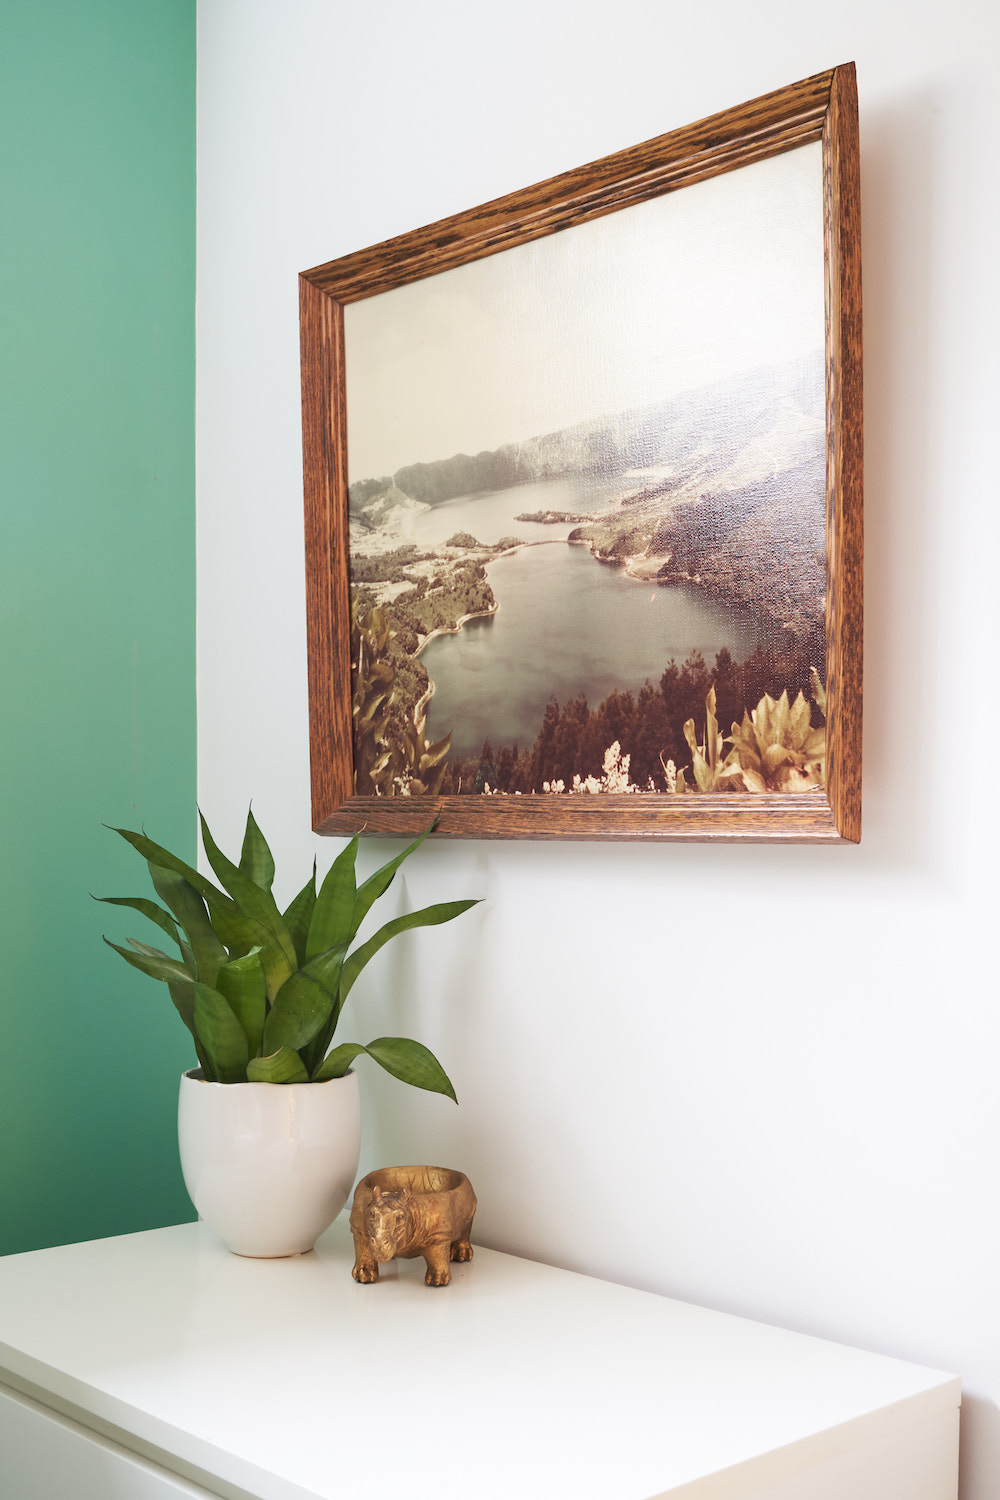 Green painted wall in corner of room with vintage oil landscape painting